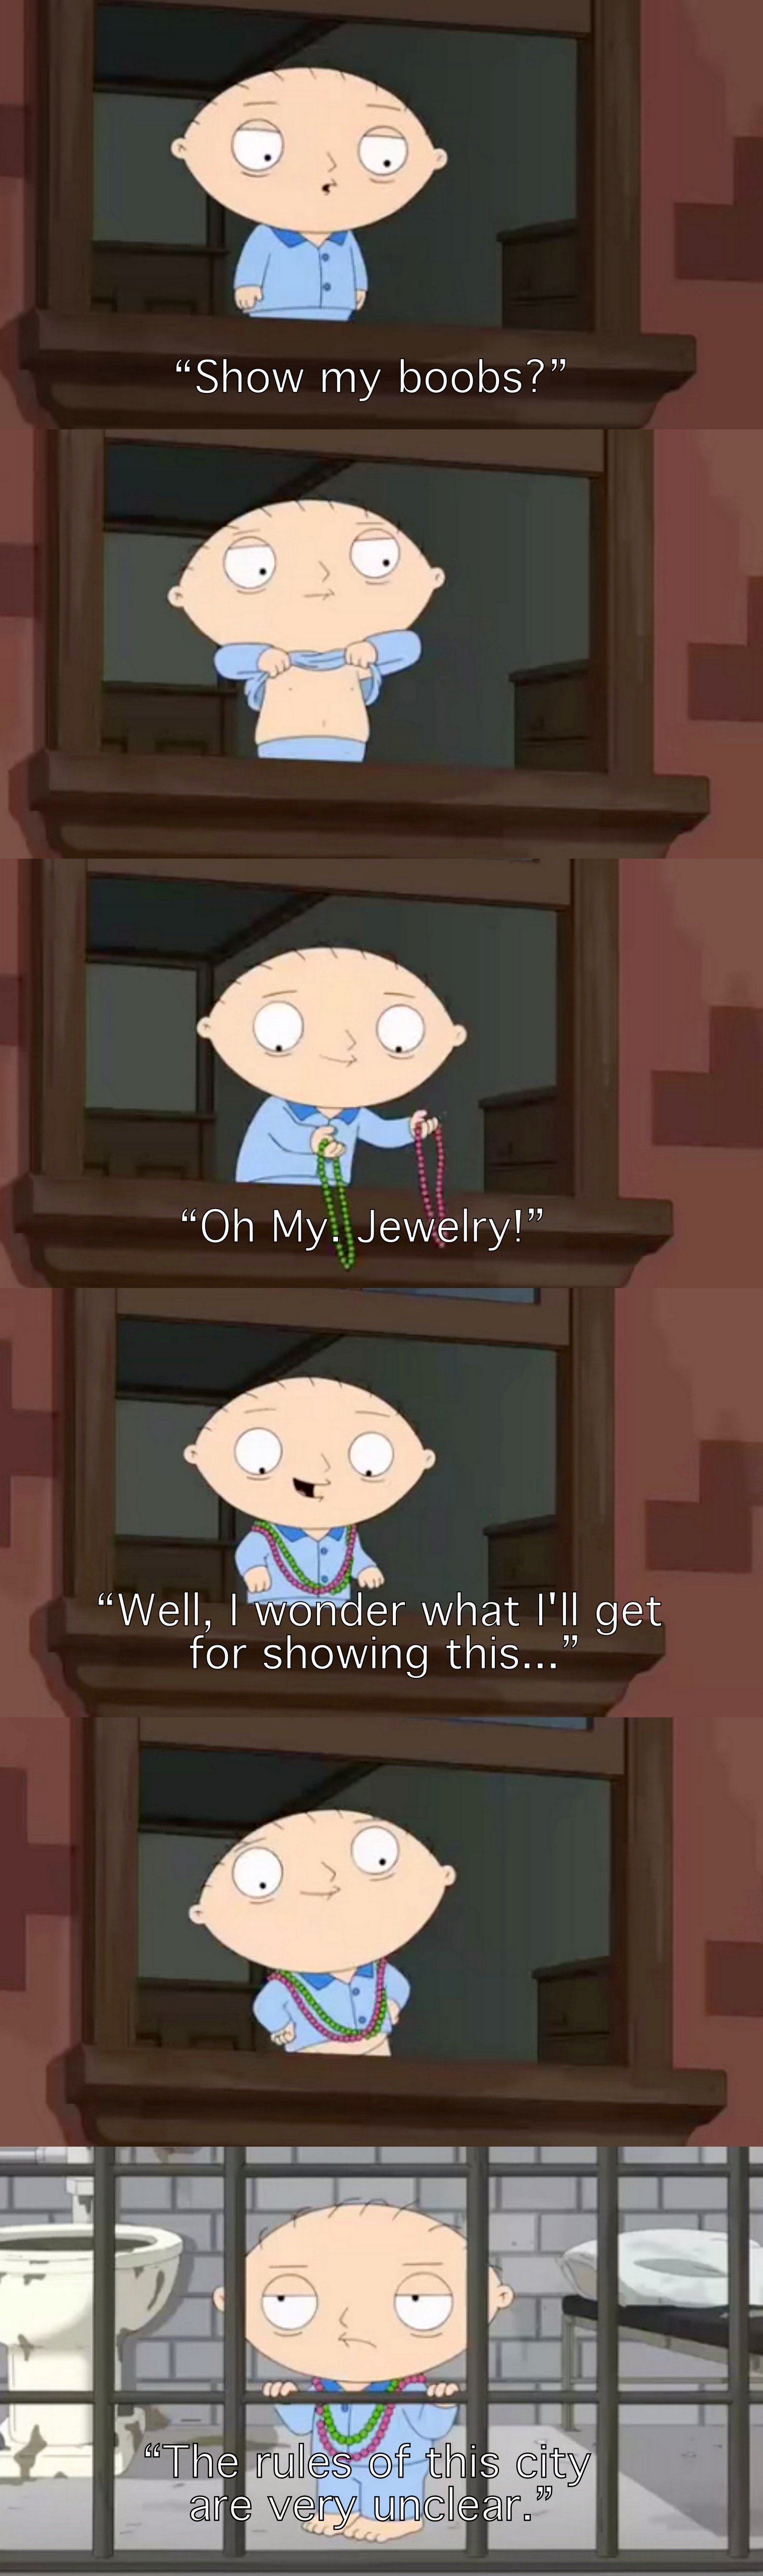 Stewie is right about New Orleans.